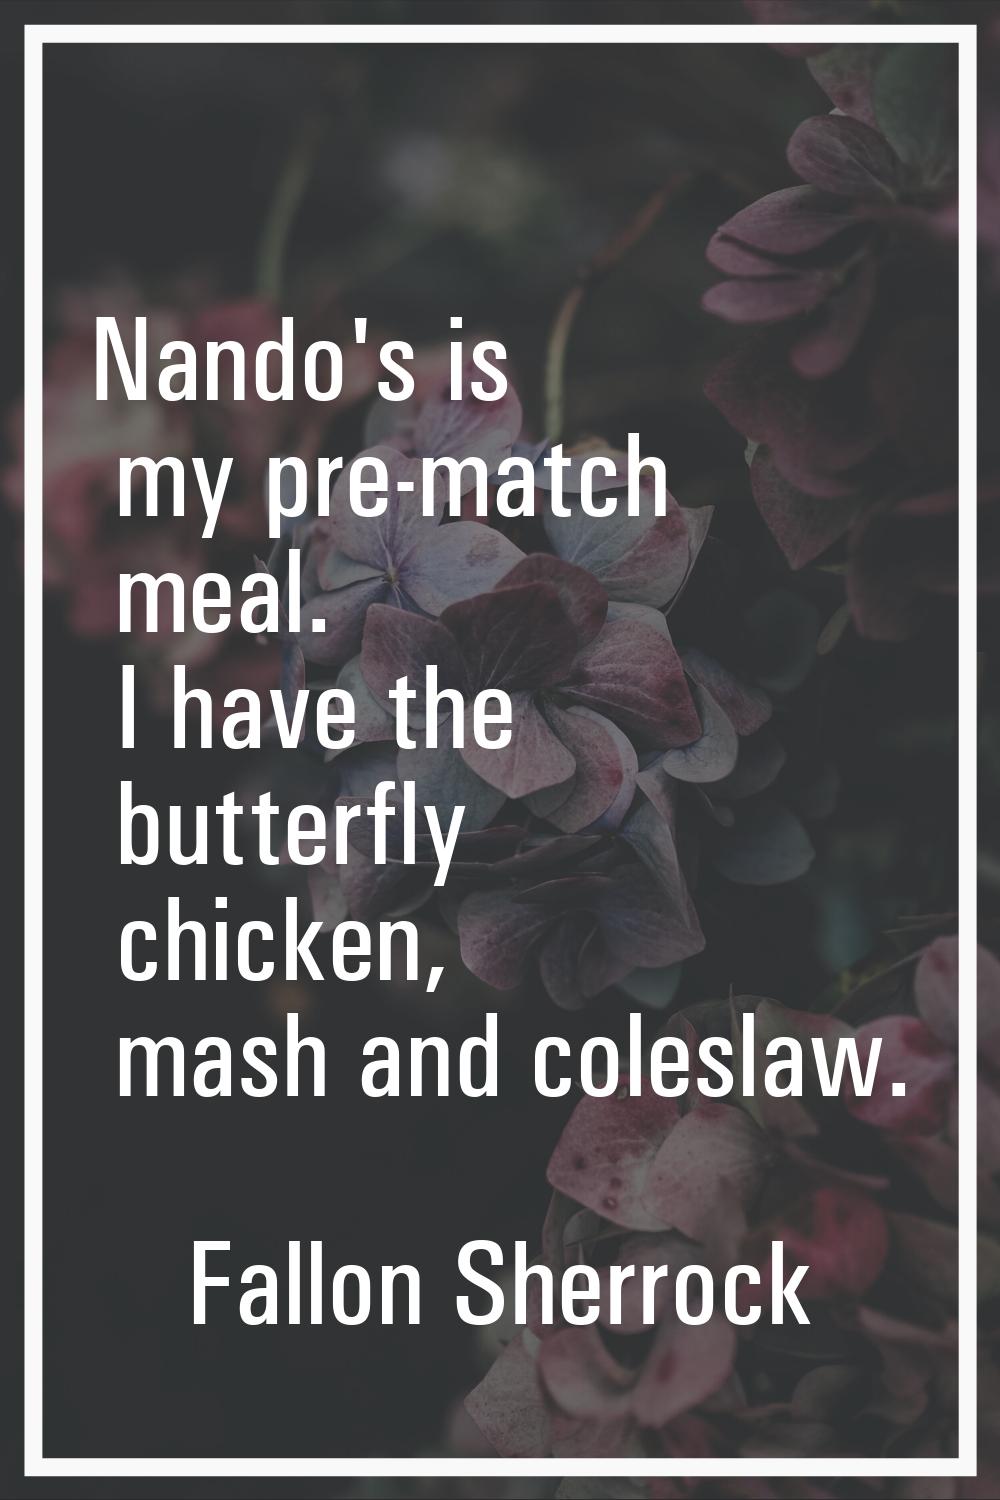 Nando's is my pre-match meal. I have the butterfly chicken, mash and coleslaw.